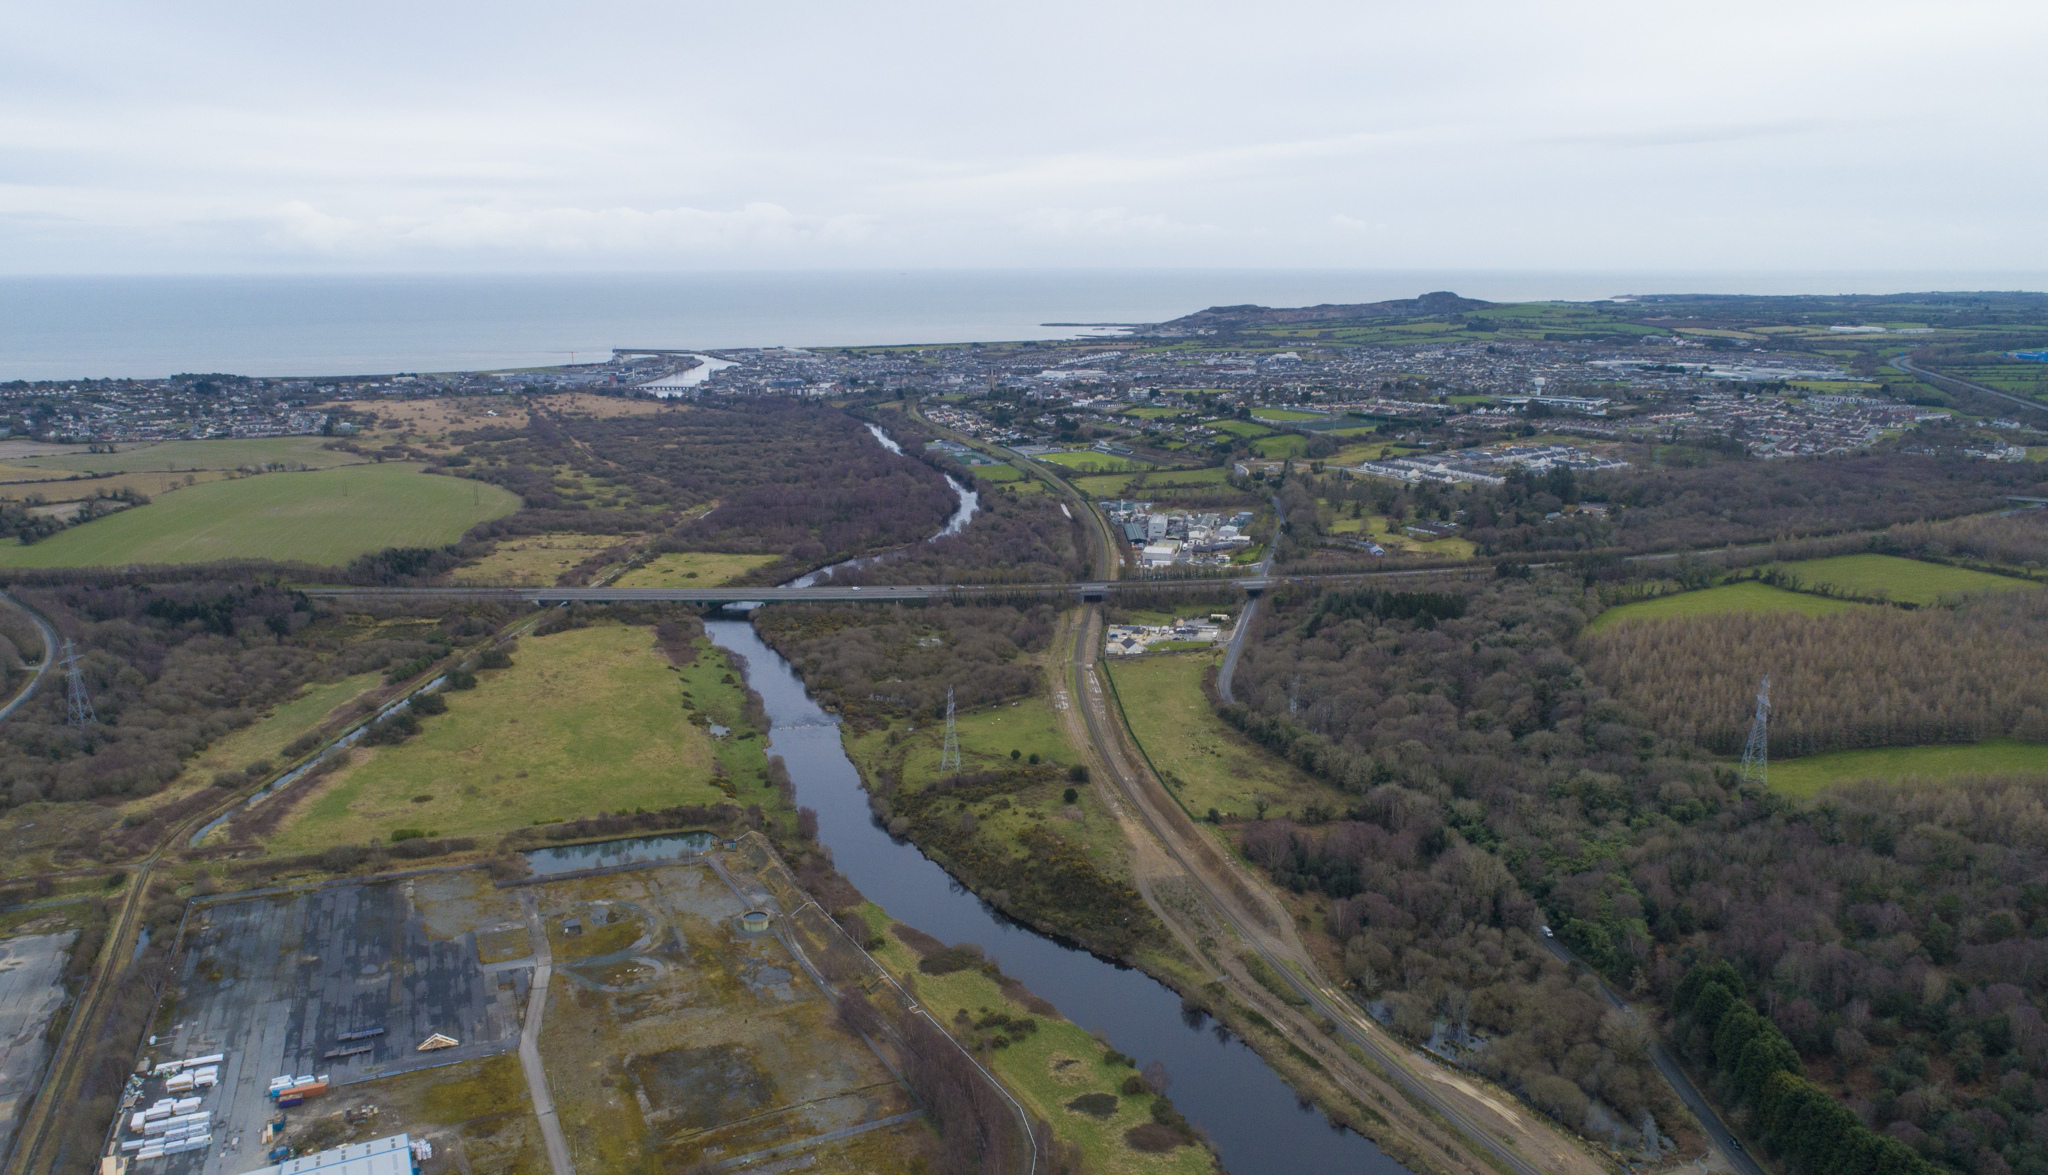 An aerial shot over Arklow, where SSE Renewables is proposing to develop the onshore grid infrastructure associated with Arklow Bank Wind Park Phase 2.